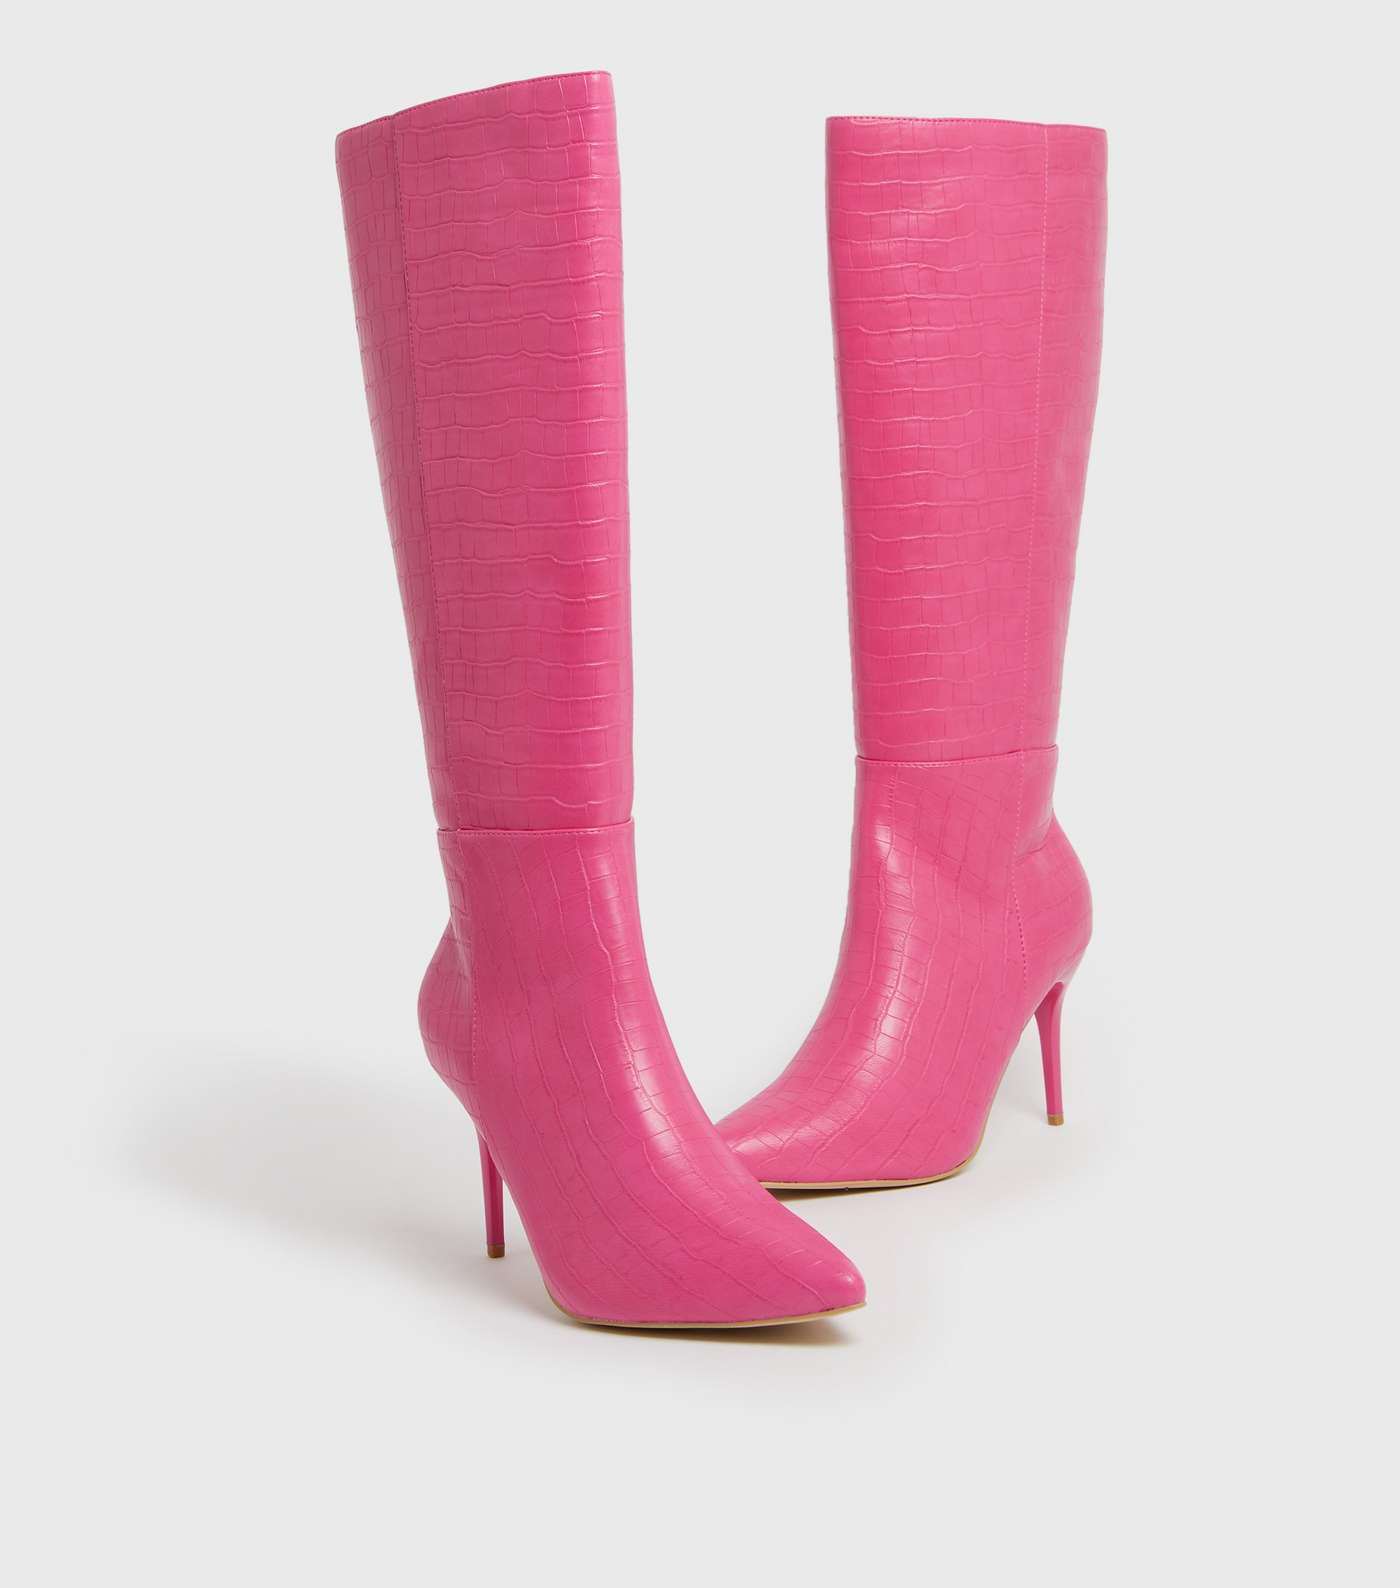 Bright Pink Faux Croc Stiletto Knee High Boots Image 2